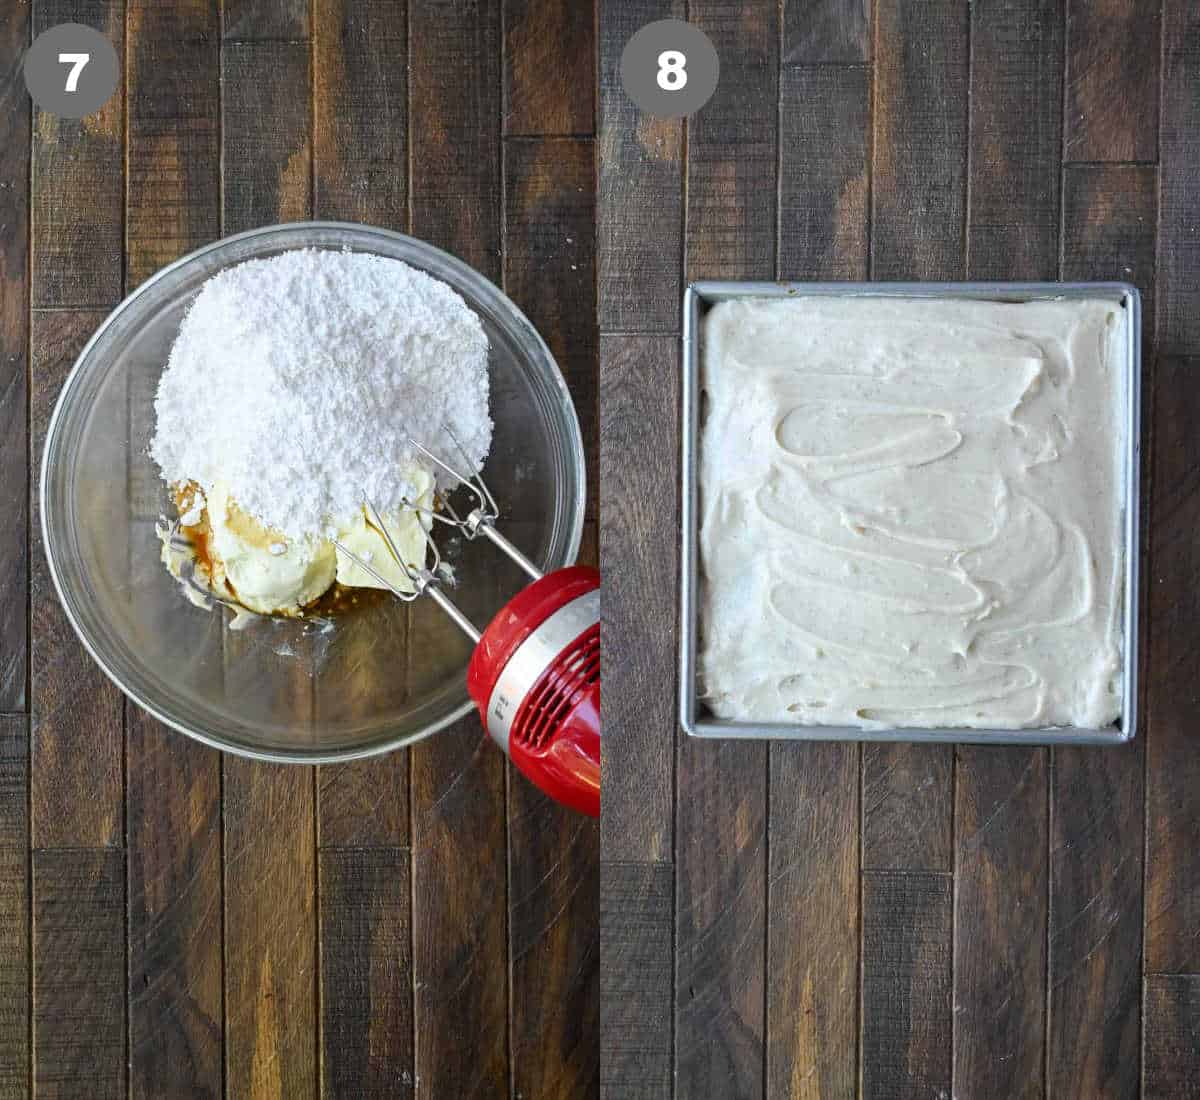 All the frosting ingredients mixed in a large bowl then spread the baked cake.